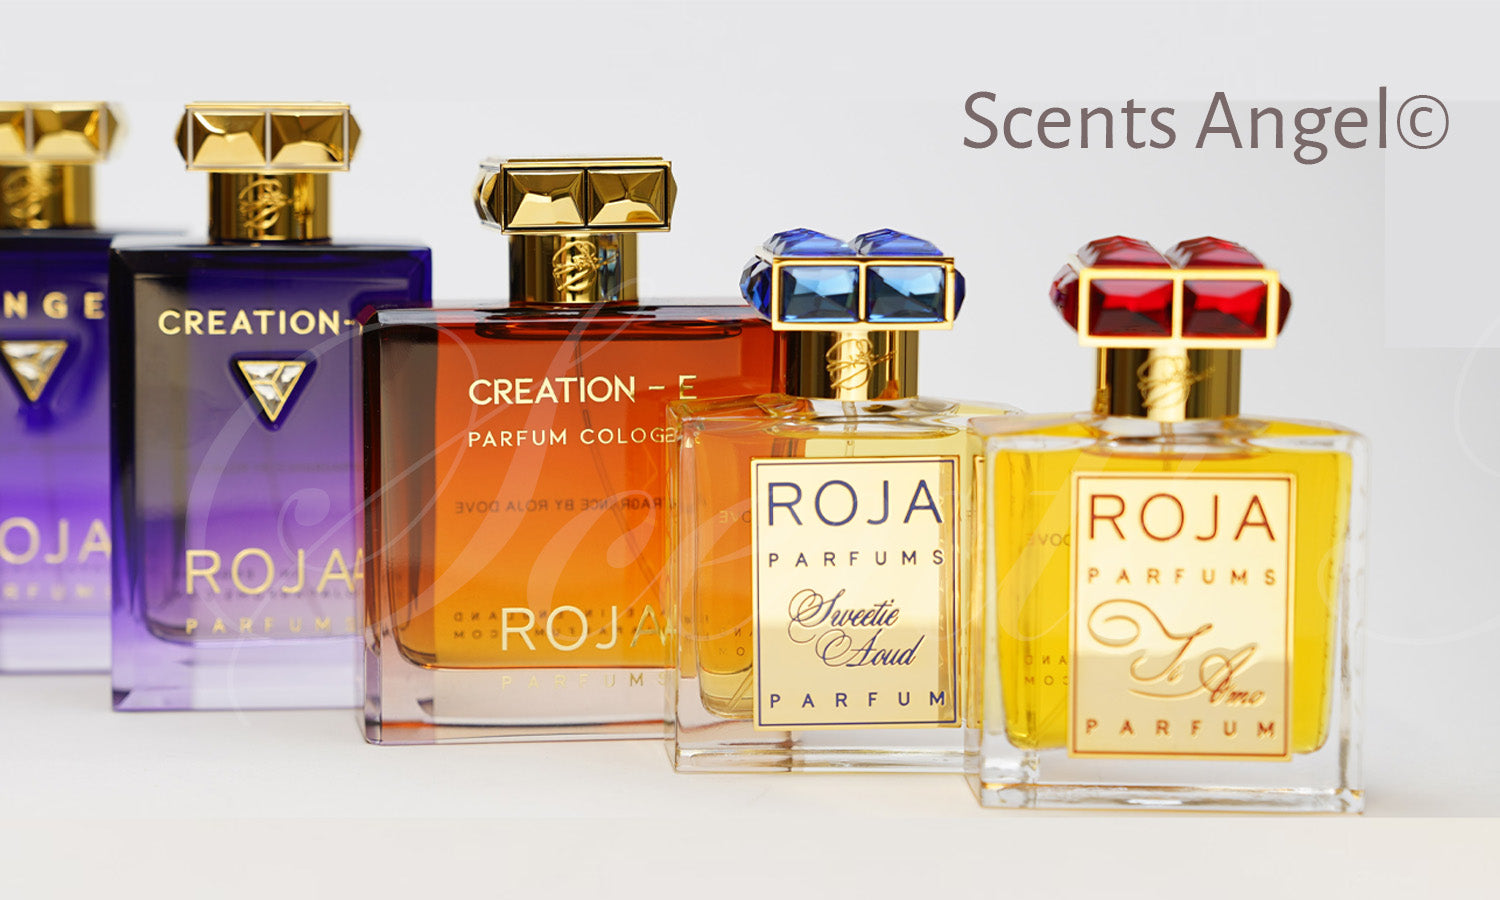 Why Are Some Perfumes So Expensive?